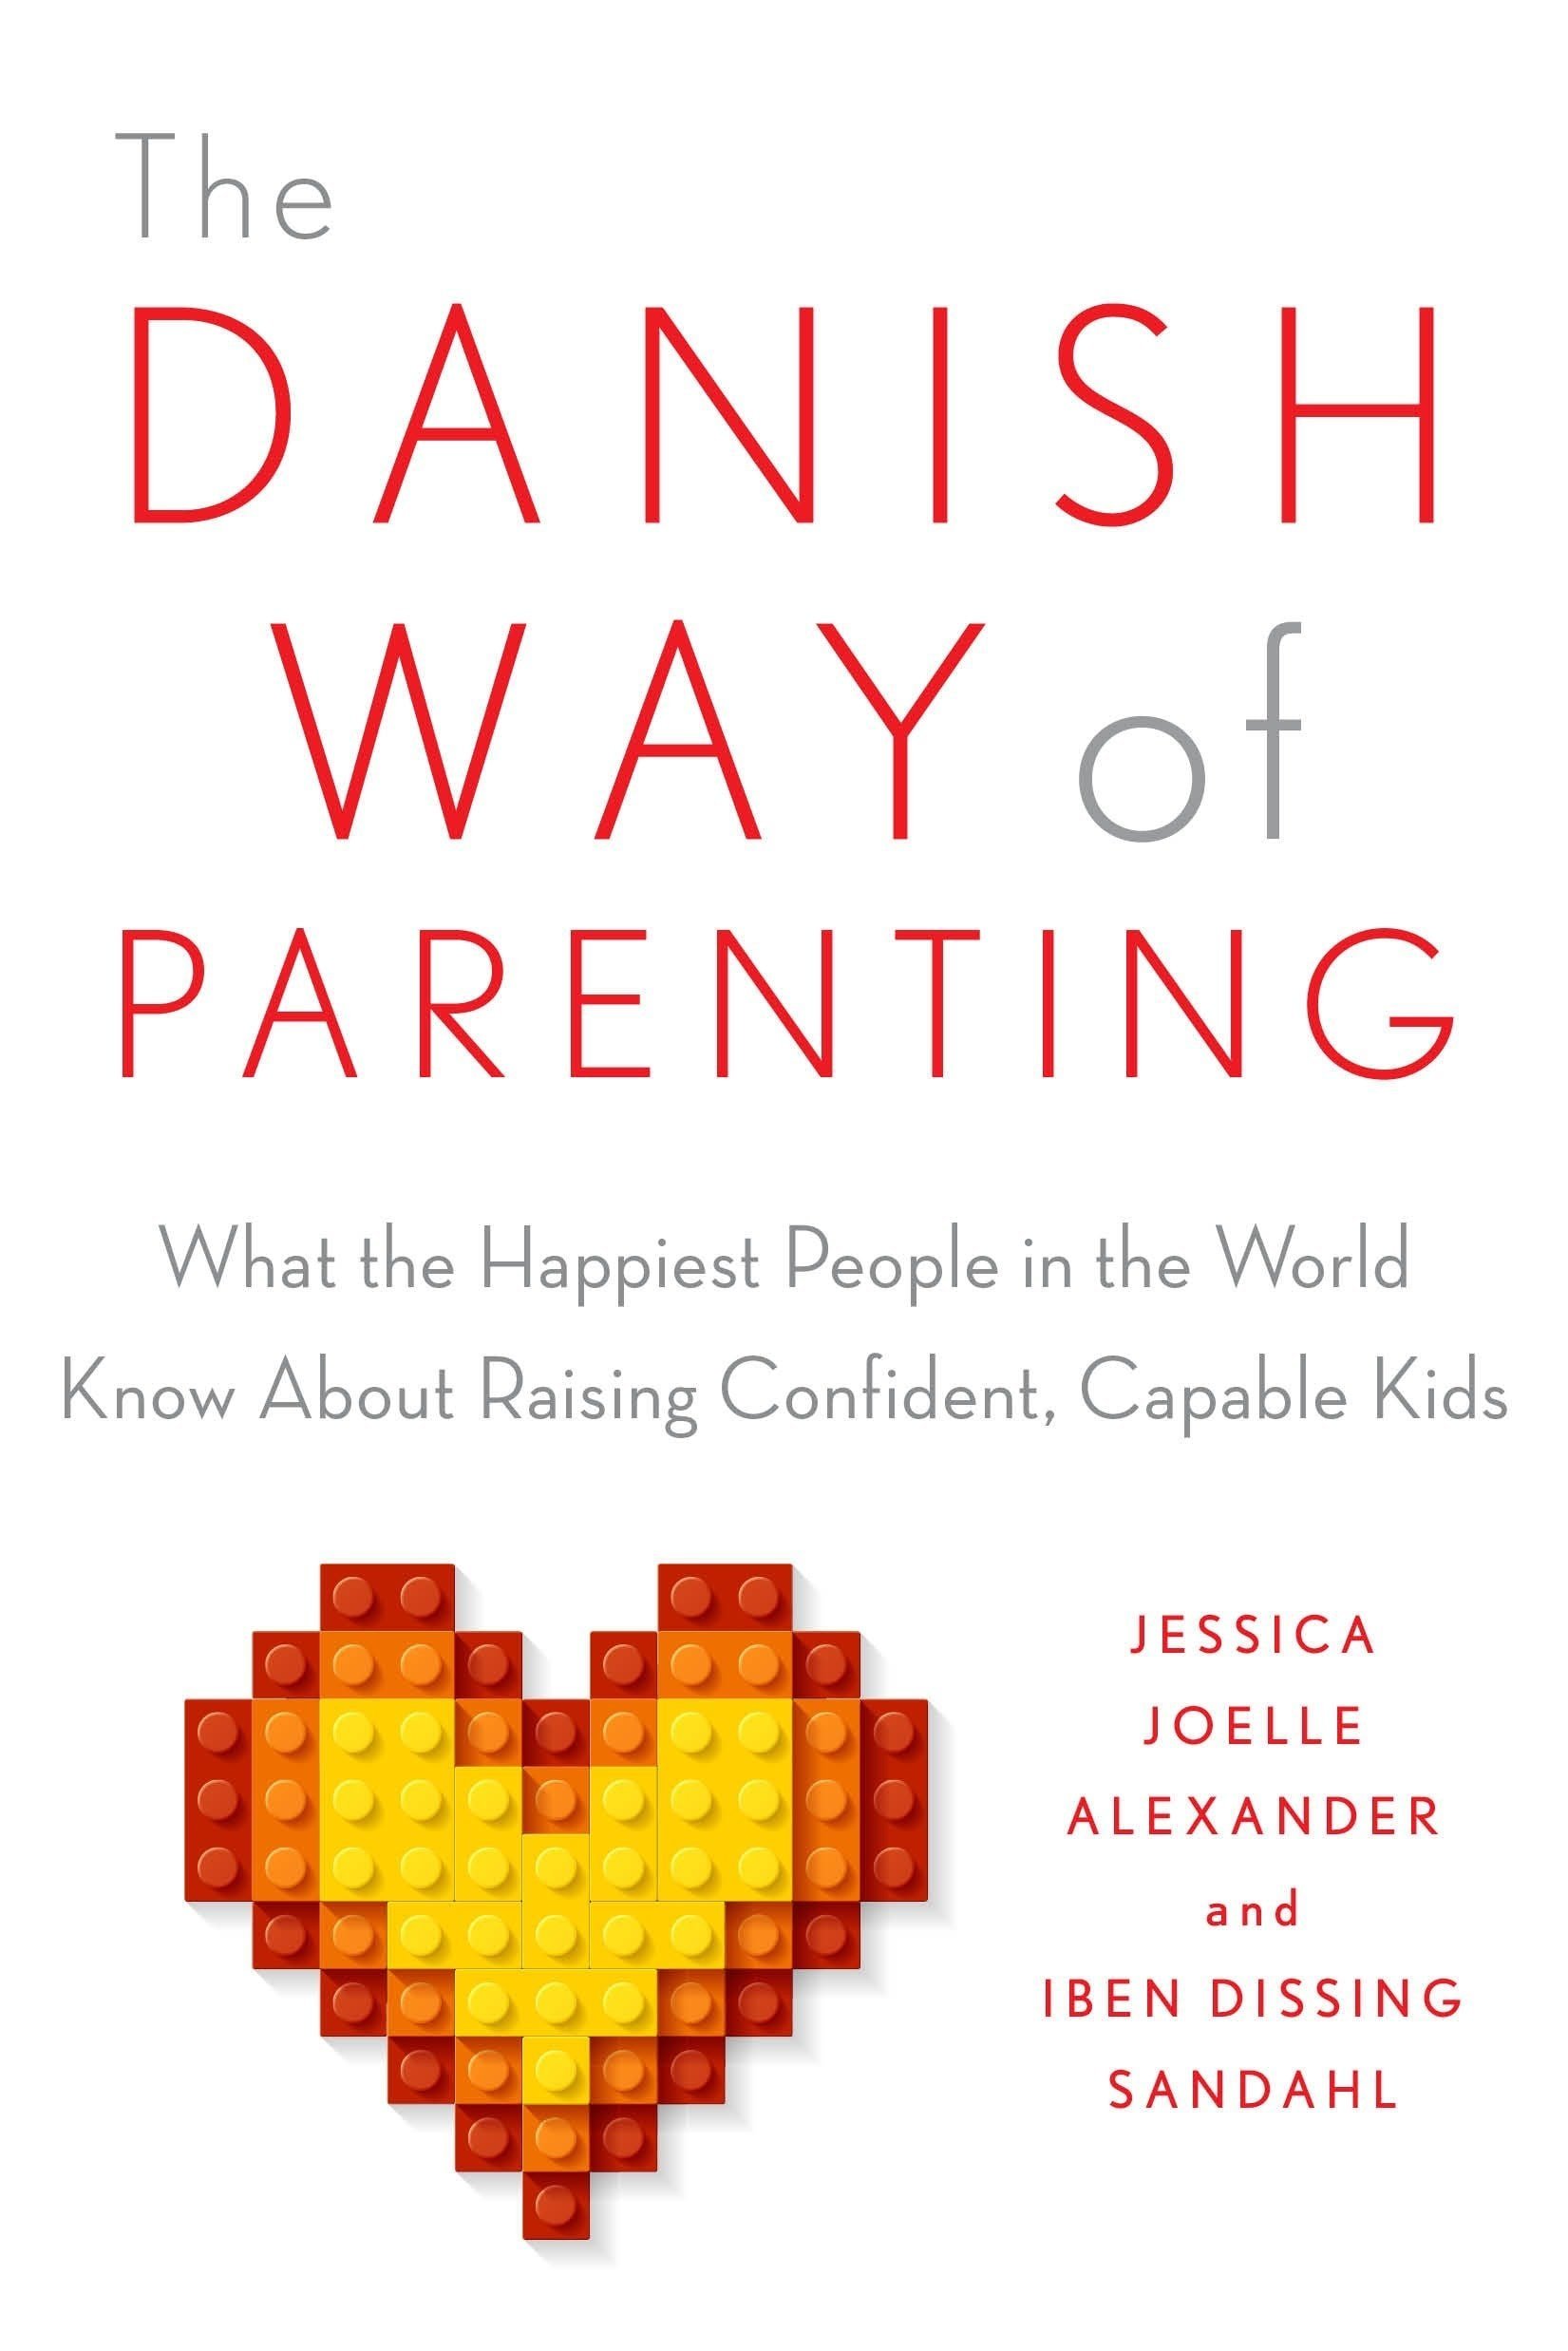 "The Danish Way of Parenting" by Jessica Joelle Alexander and Iben Sandahl